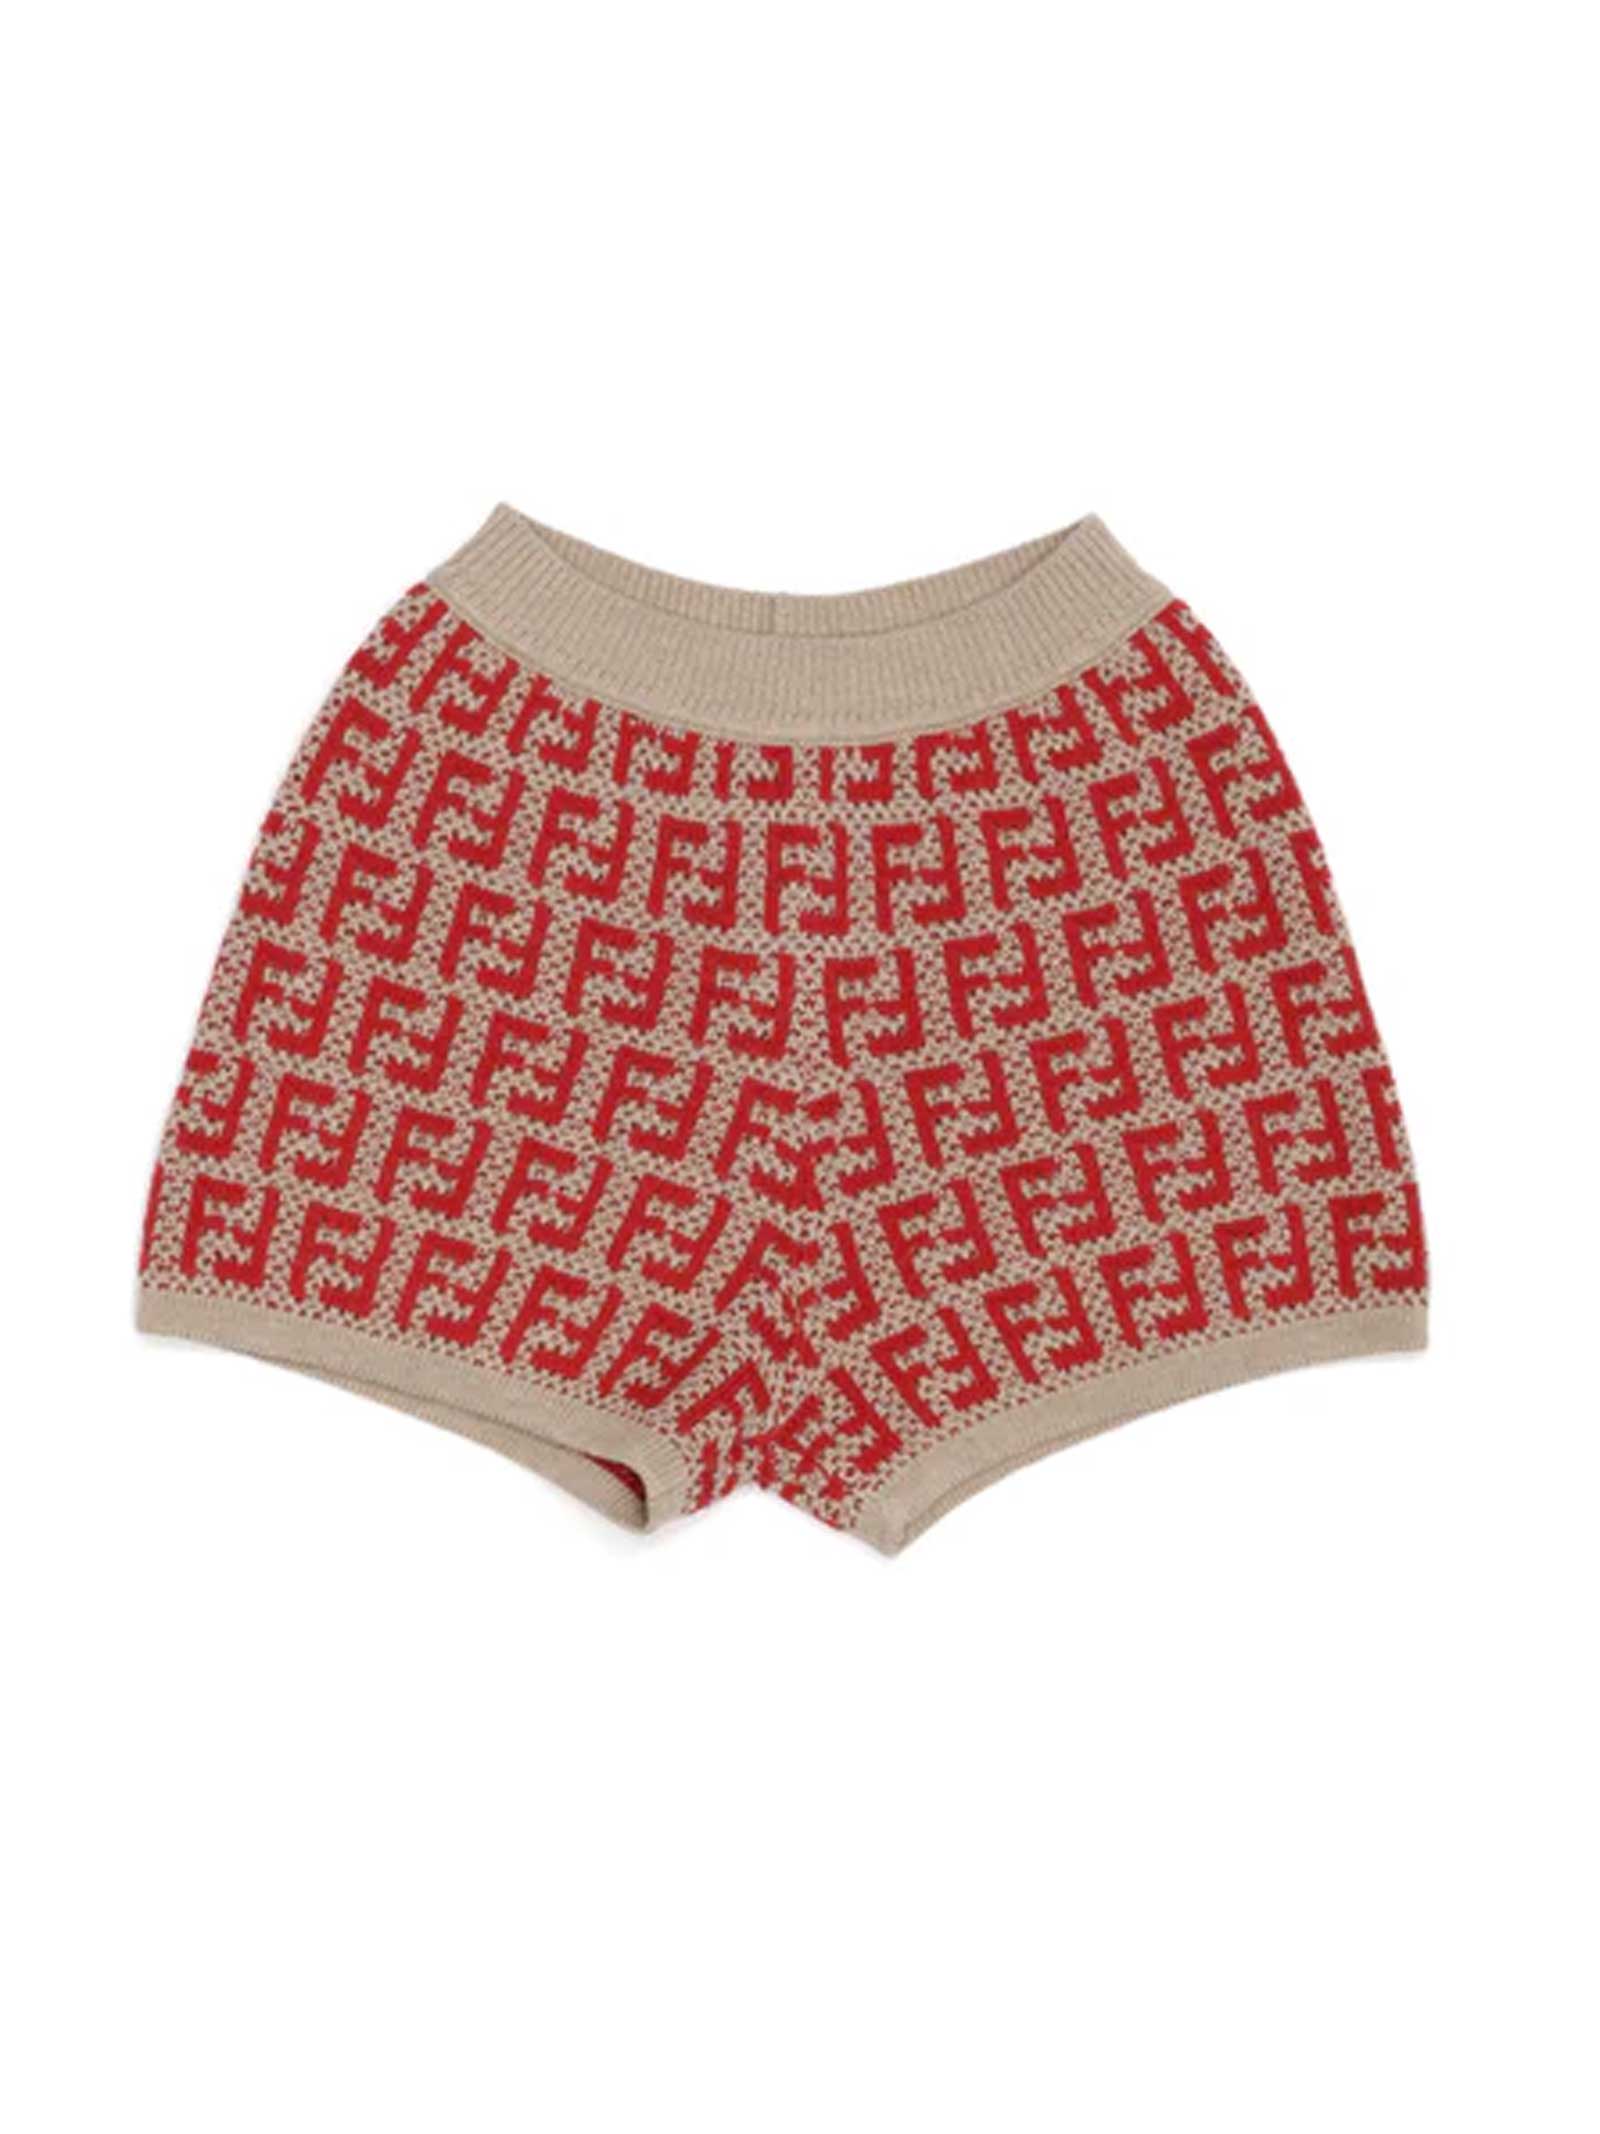 Fendi Beige And Red Shorts